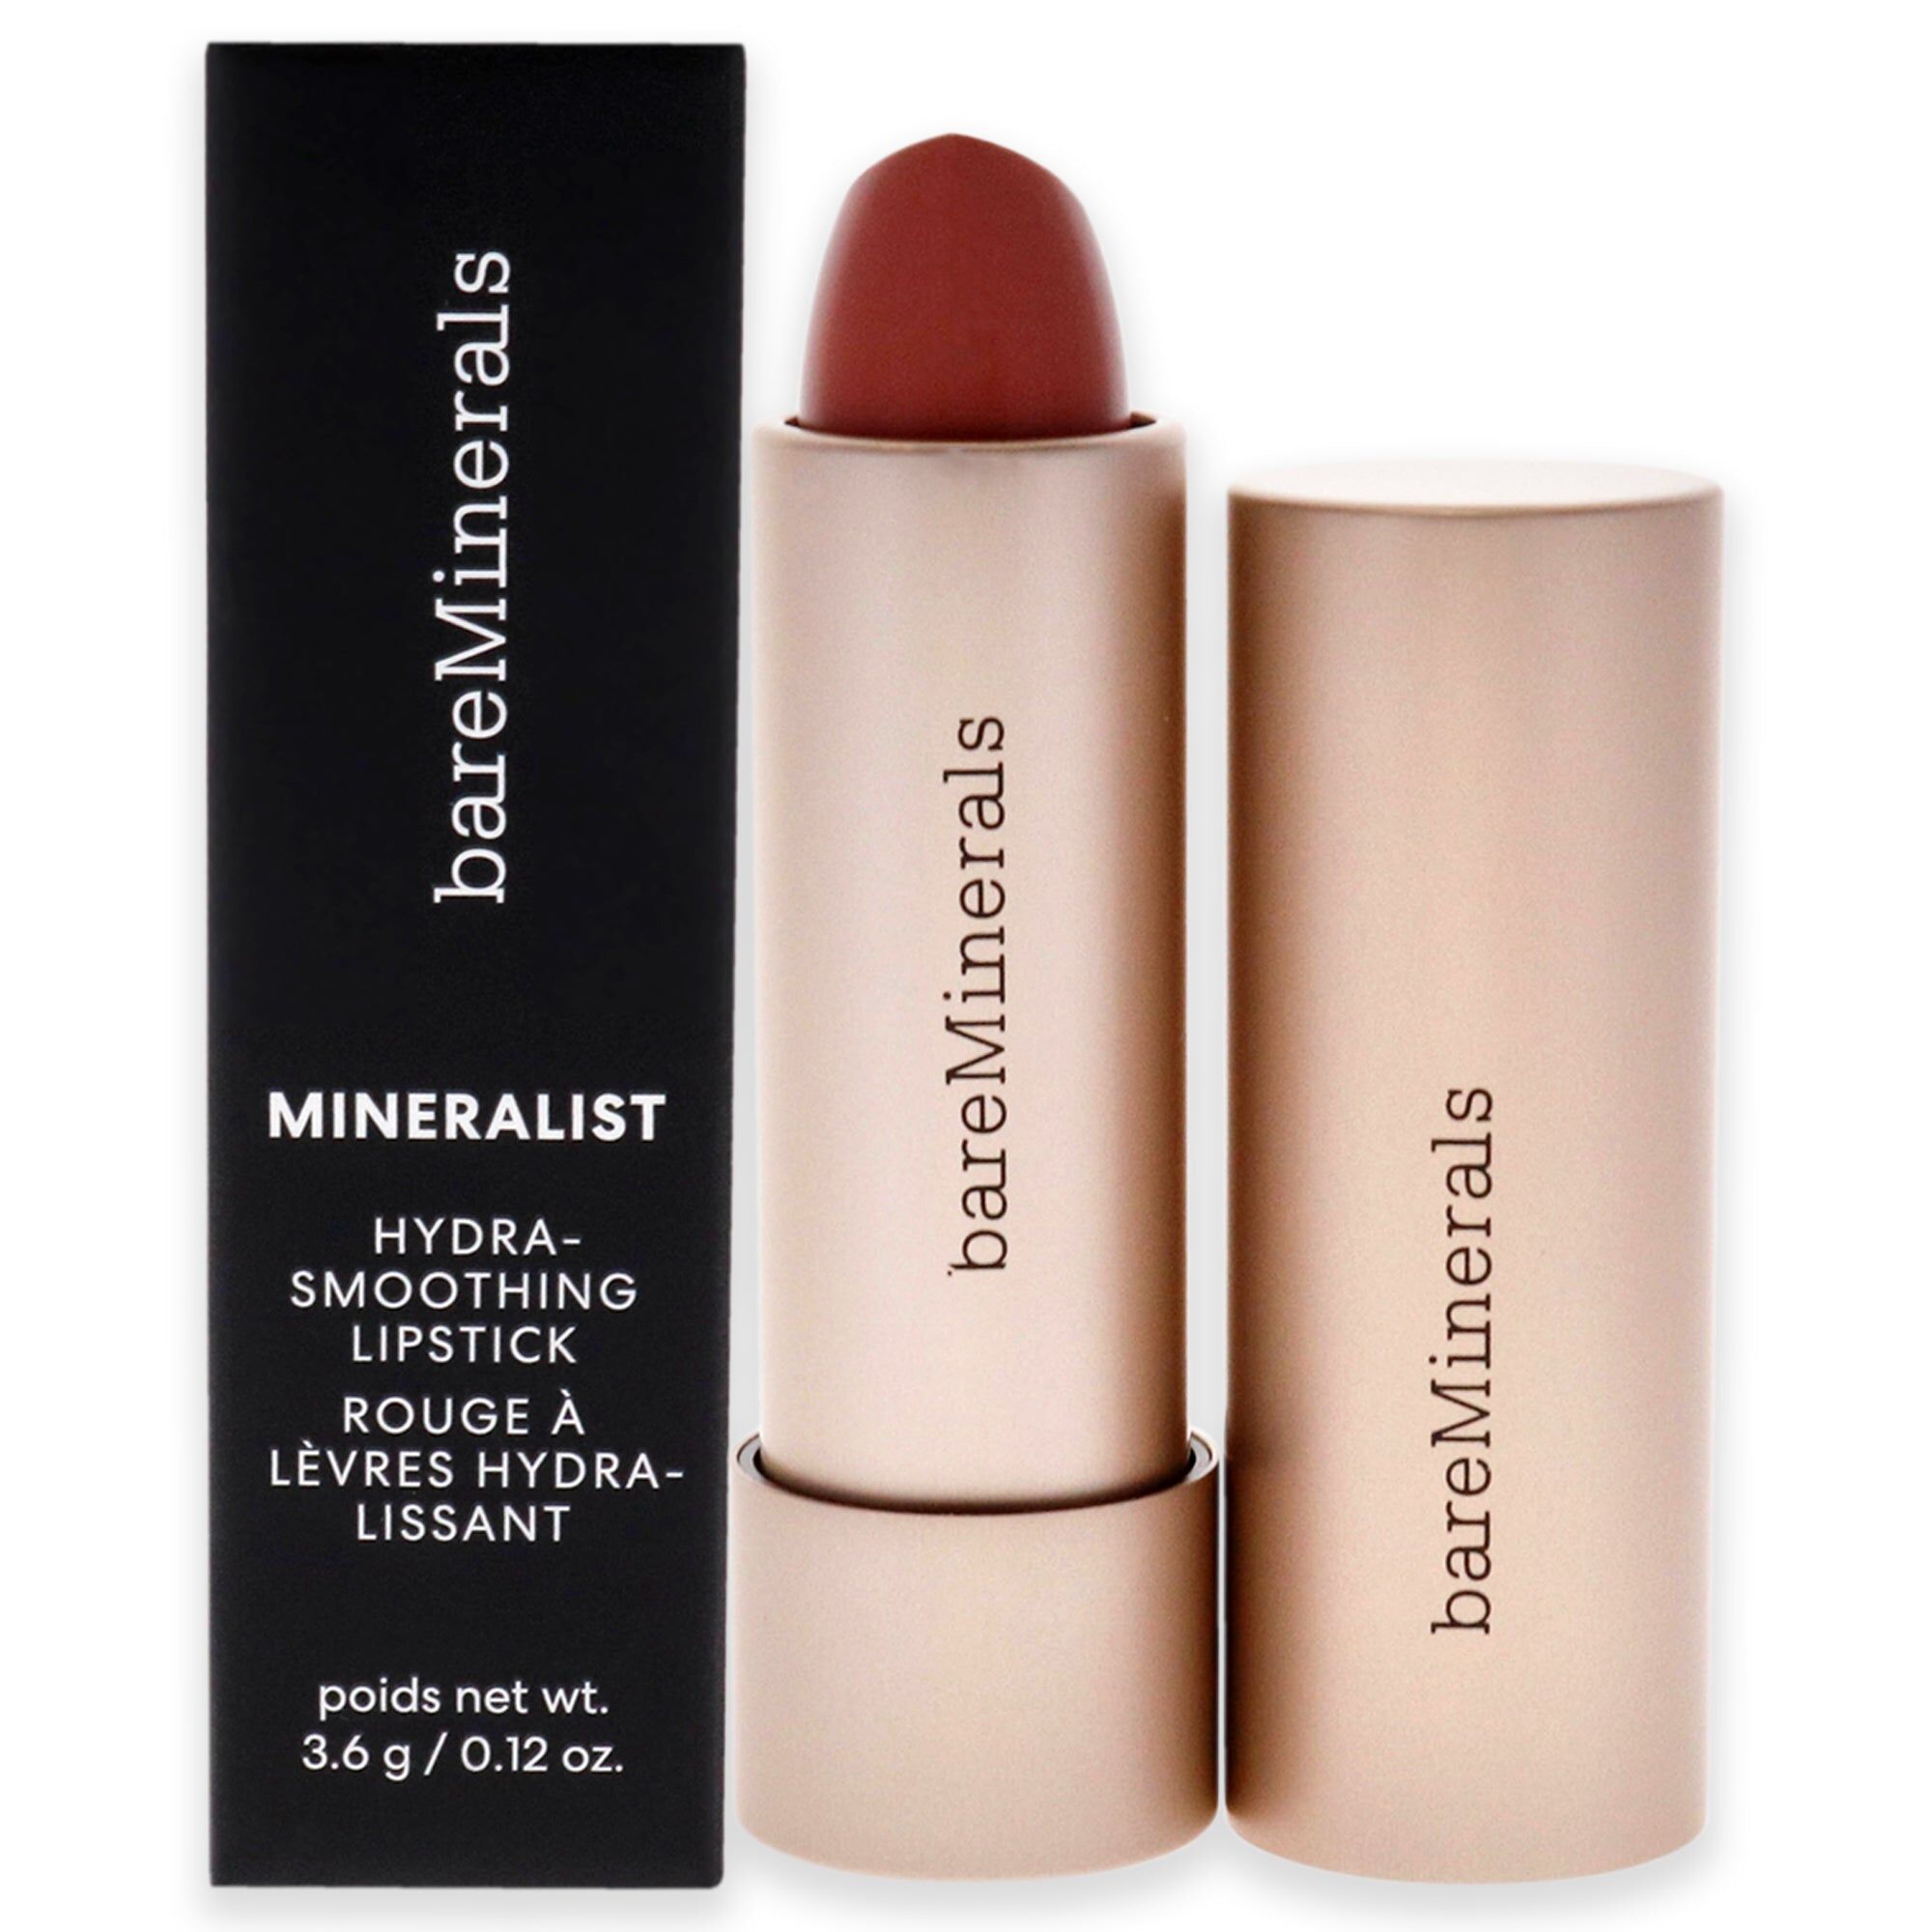 Mineralist Hydra-Smoothing Lipstick - Grace by bareMinerals for Women - 0.12 oz Lipstick Small